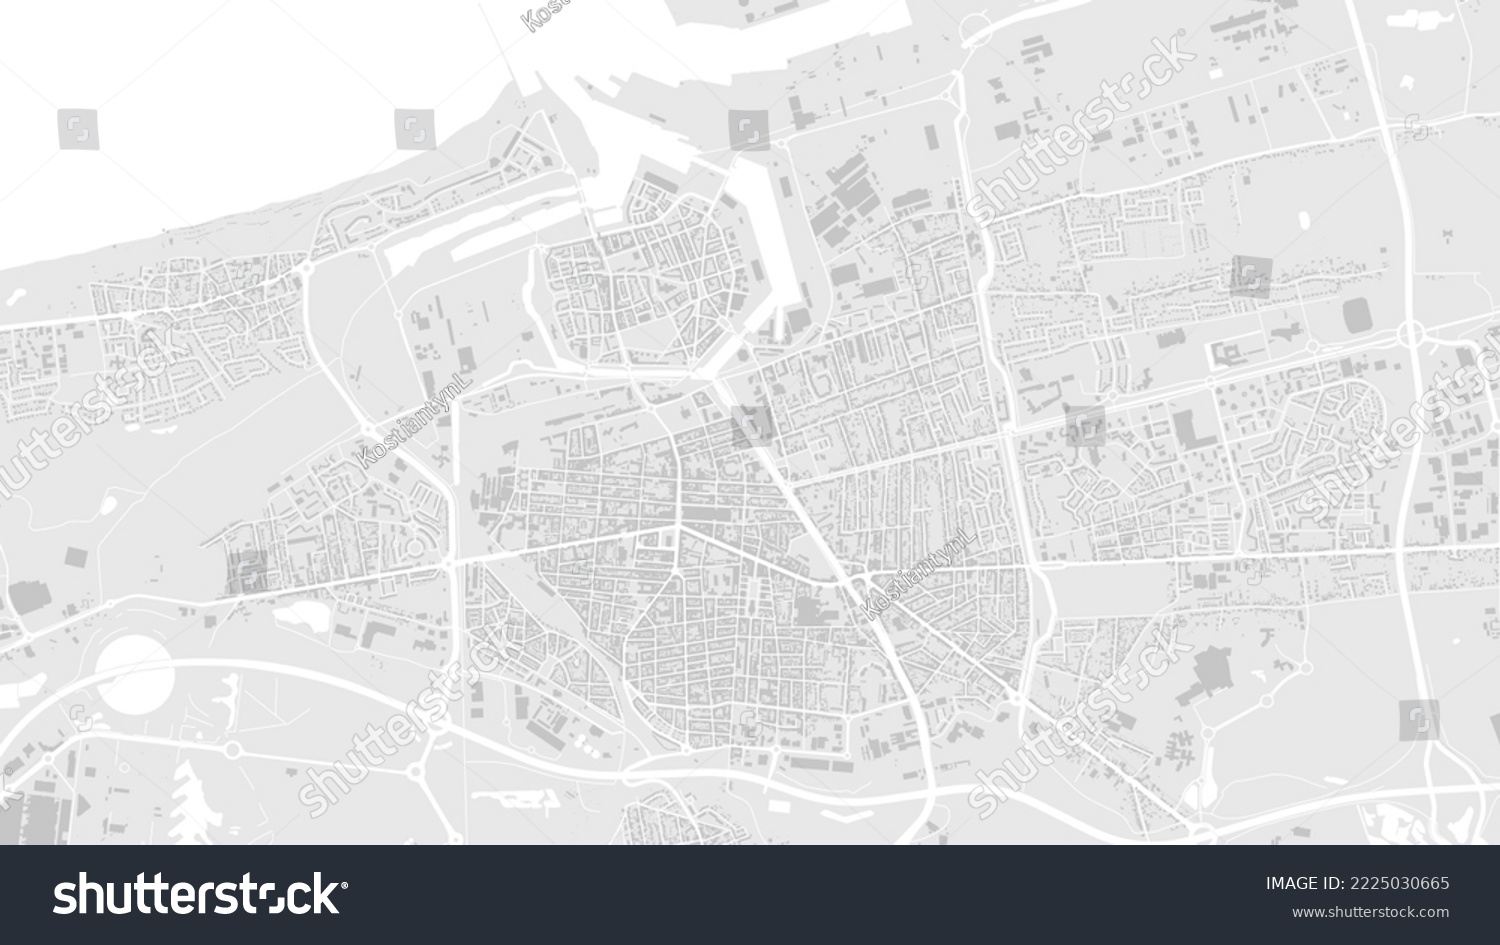 SVG of White and light grey Calais city area vector background map, roads and water illustration. Widescreen proportion, digital flat design roadmap. svg